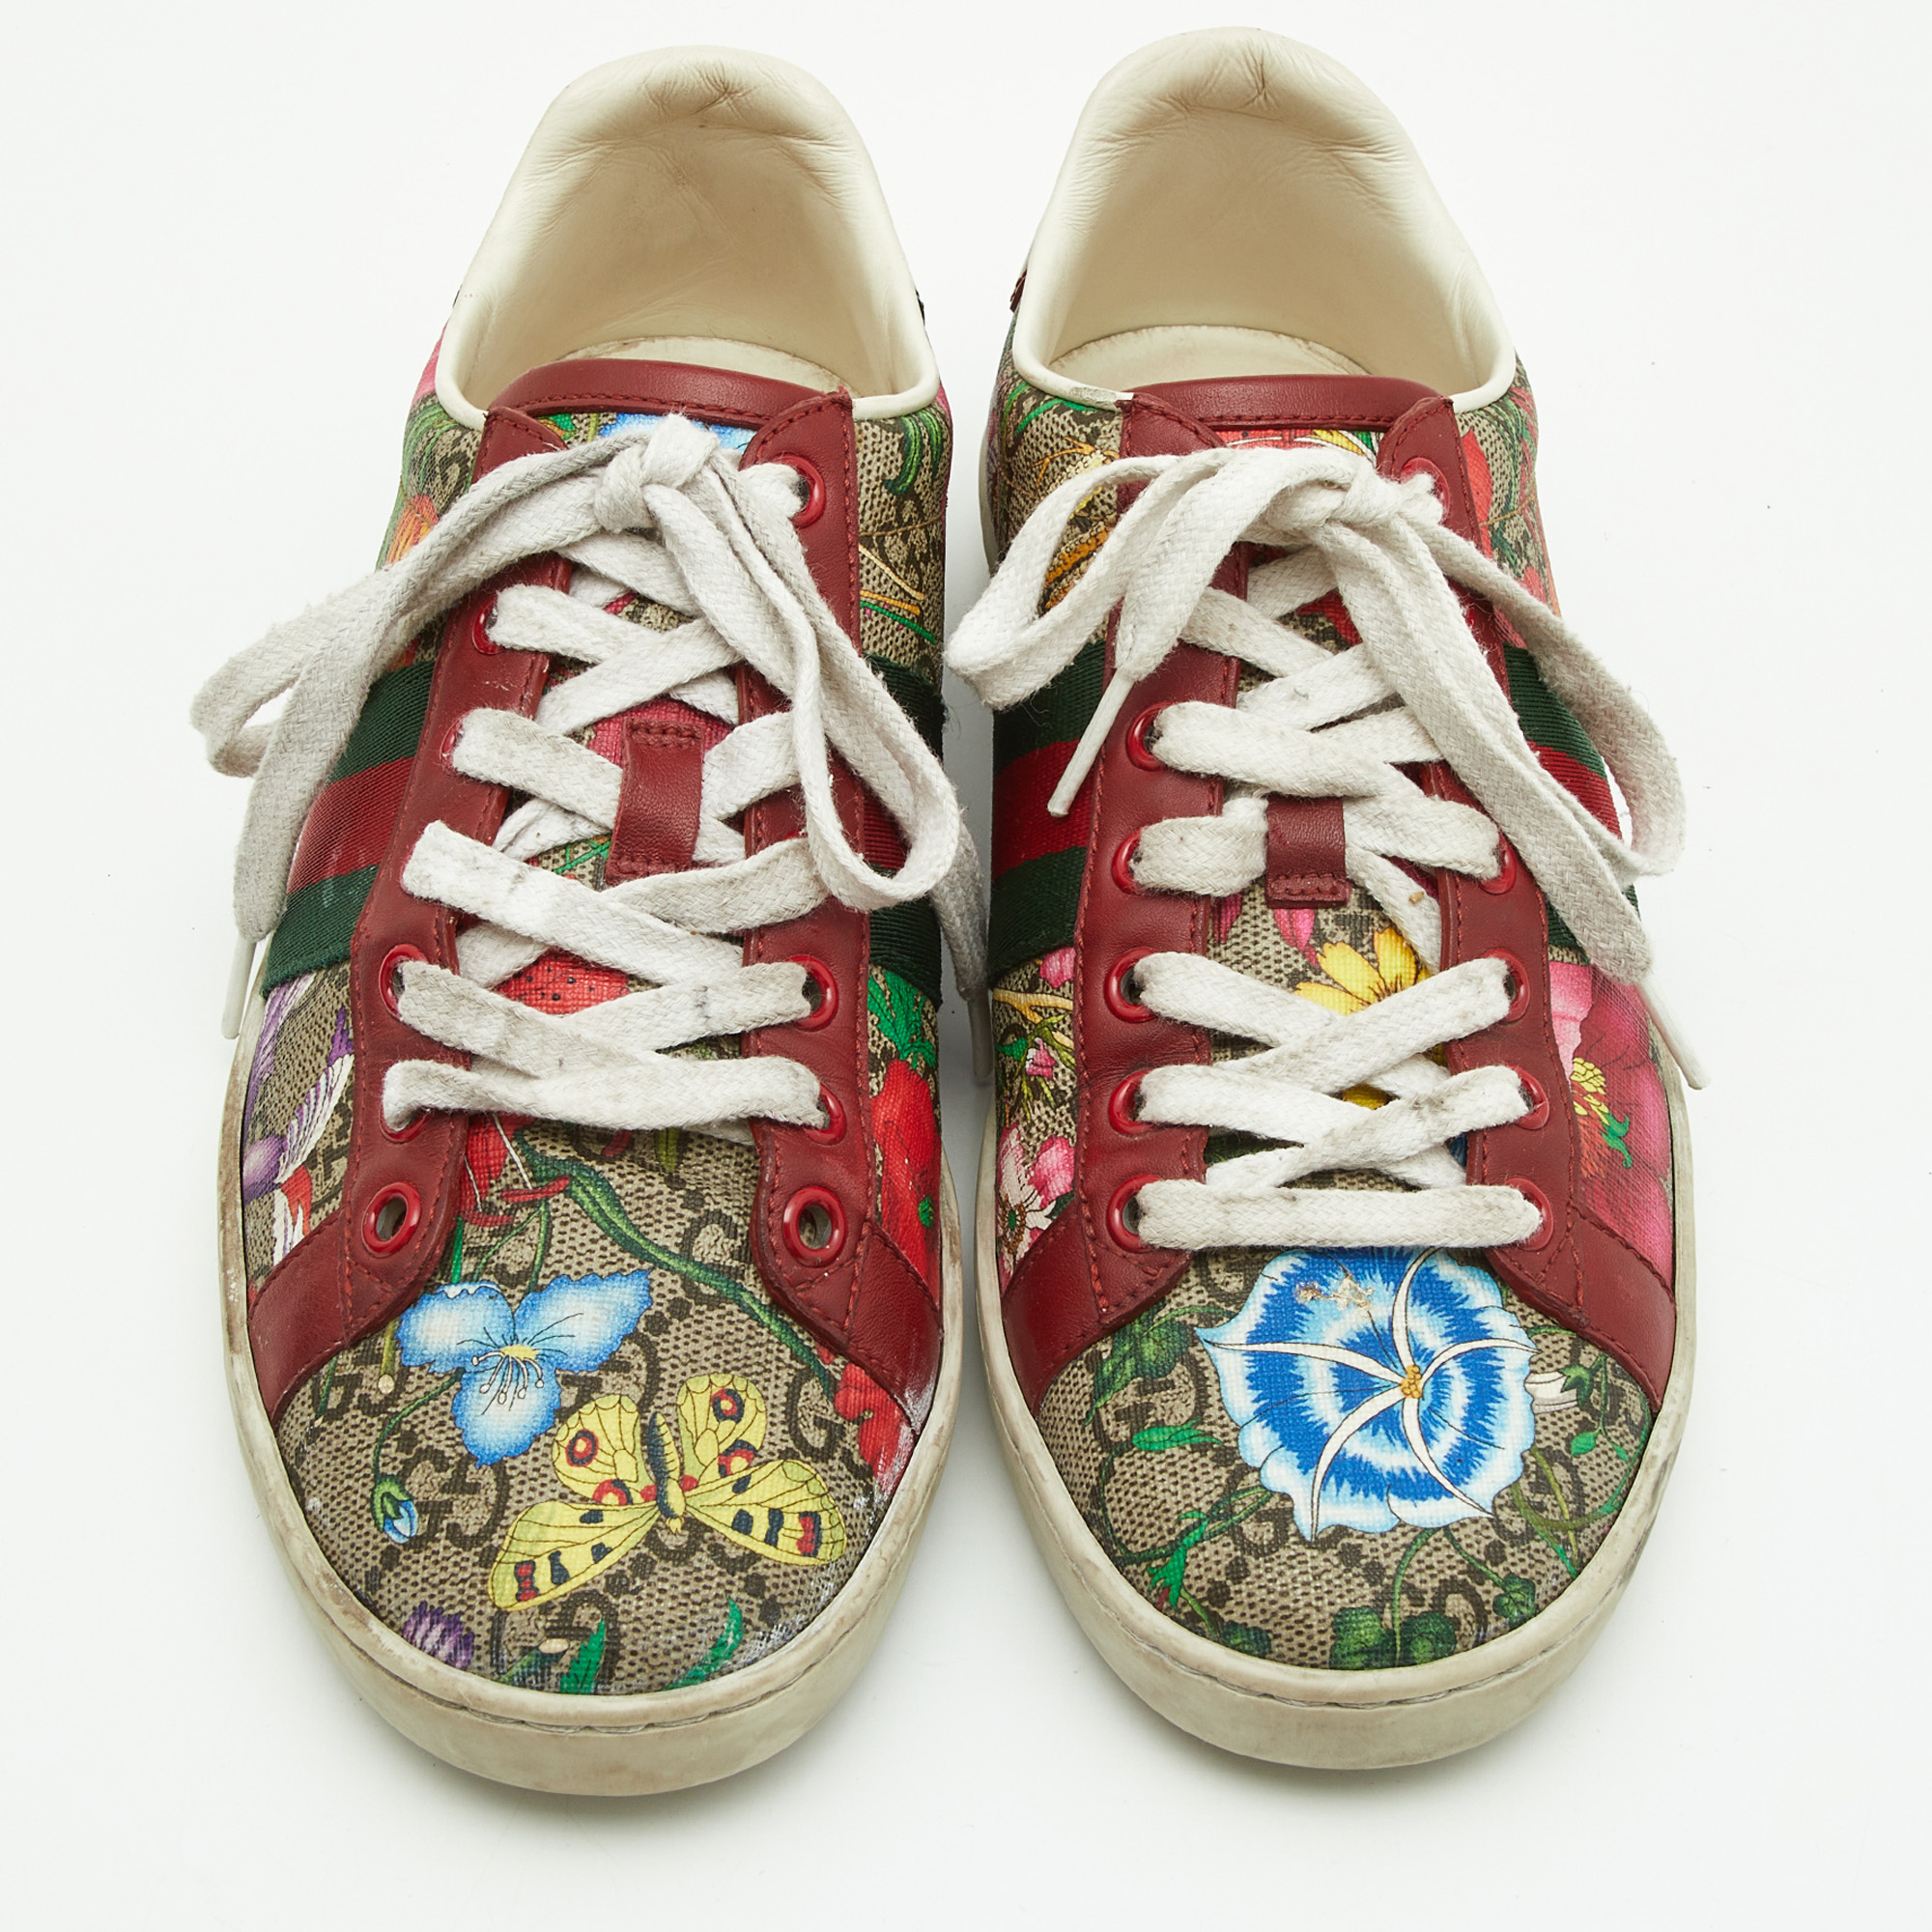 Gucci Multicolor Floral Print GG Supreme Canvas And Leather Ace Low Top Sneakers Size 36